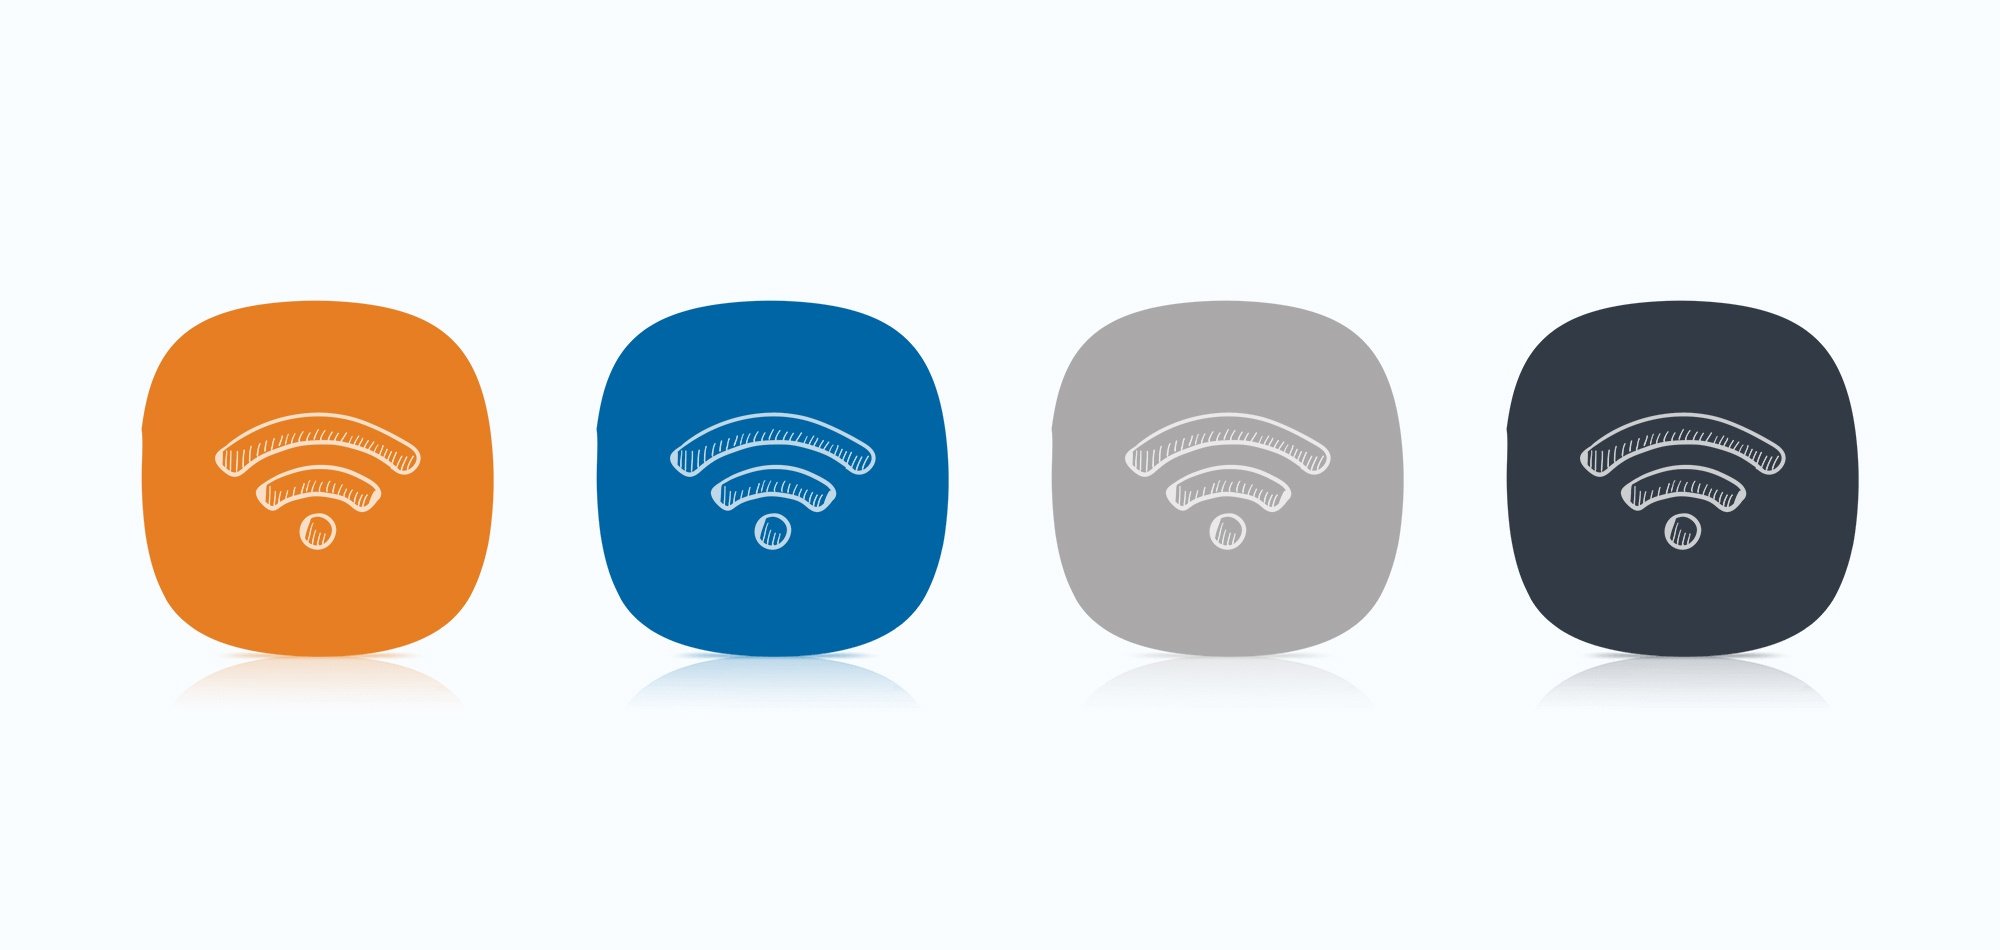 WiFi Basics: What Type of Access Points Do I Need and How Many?